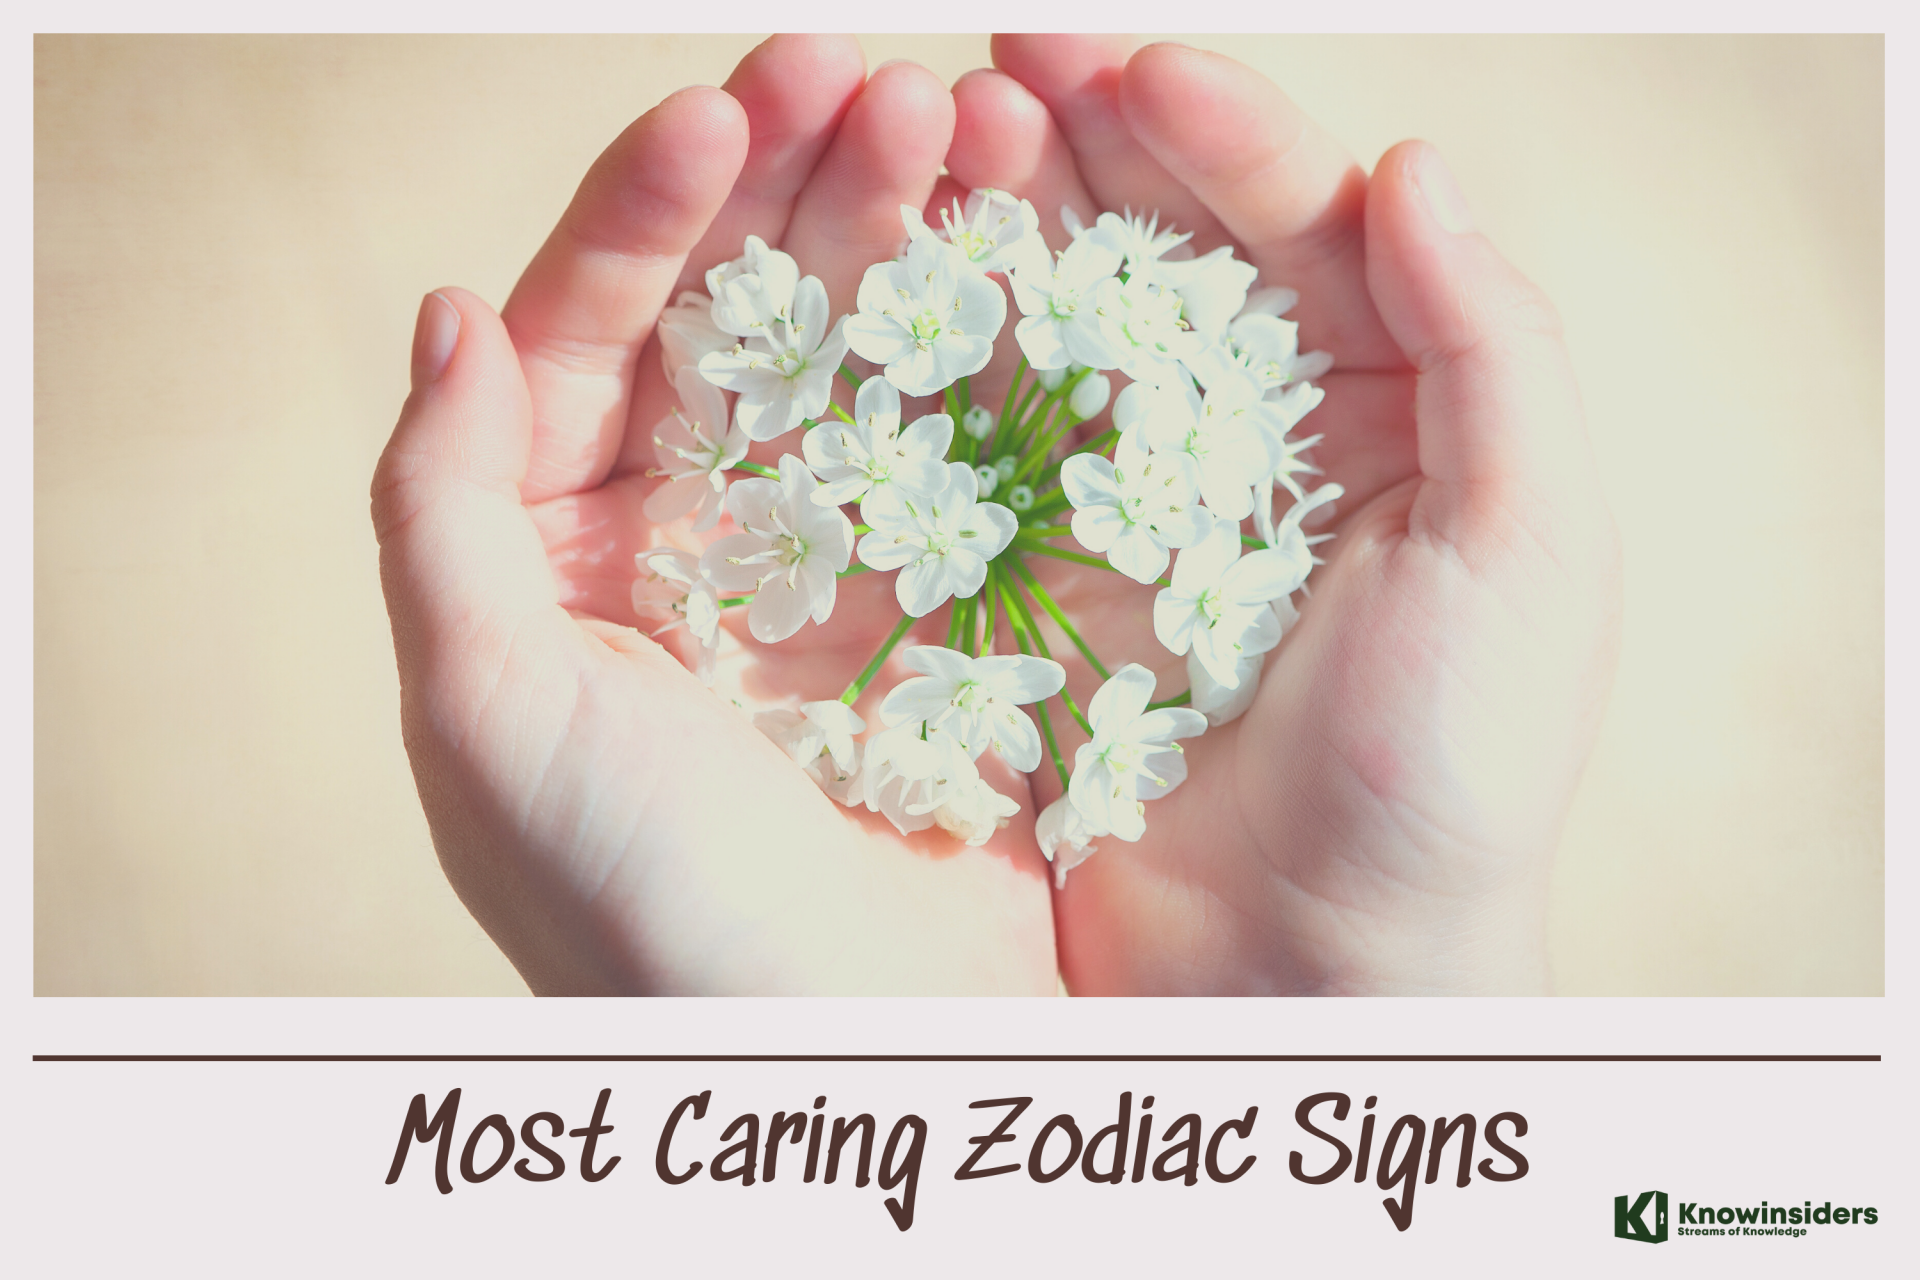 top 5 most caring zodiac signs who show warm heartedness in different ways